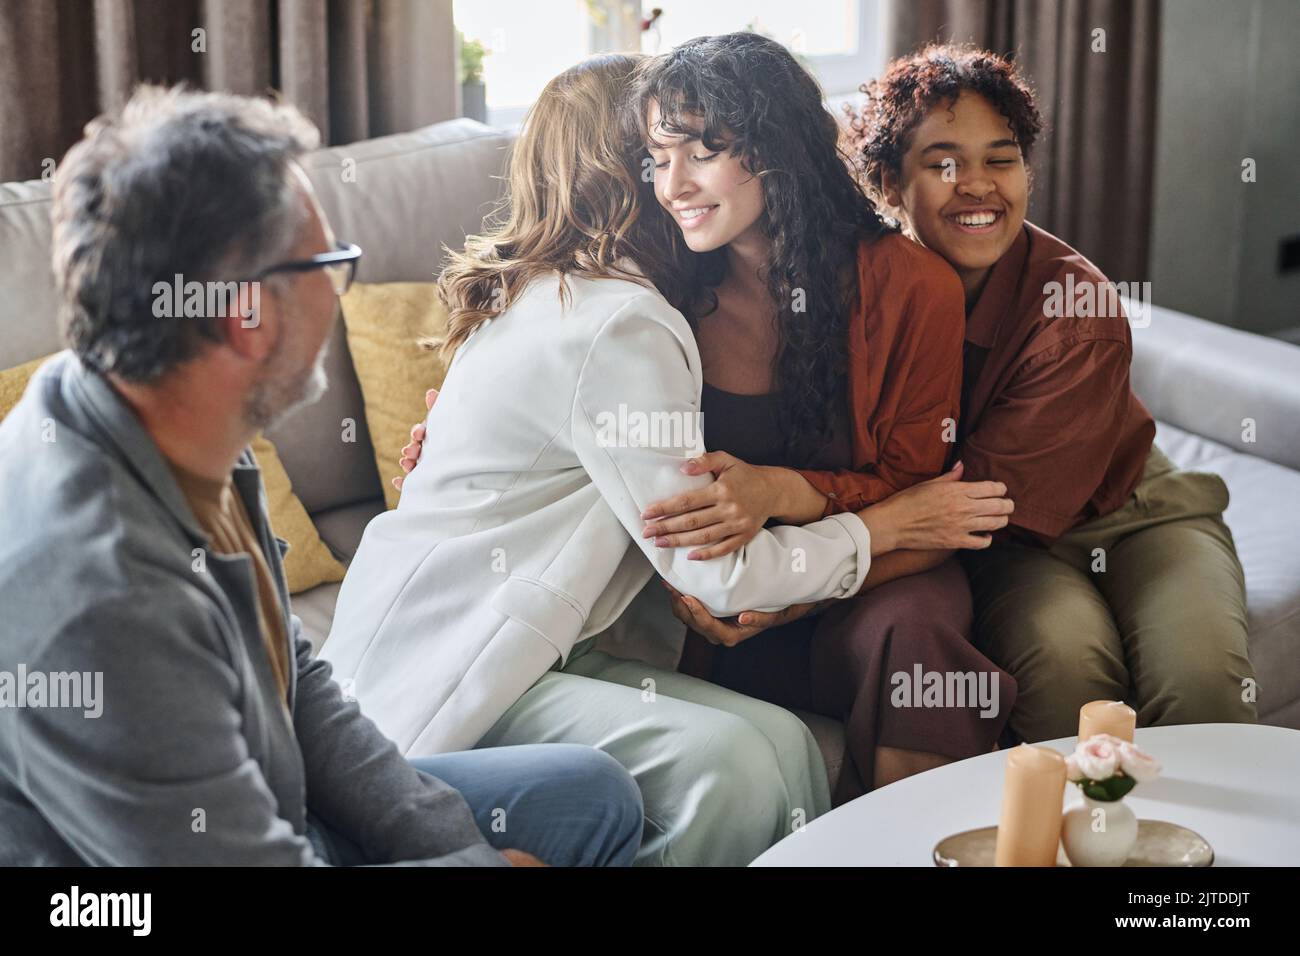 Happy young brunette woman giving hug to mother while sitting on couch next to her cheerful African American girlfriend Stock Photo